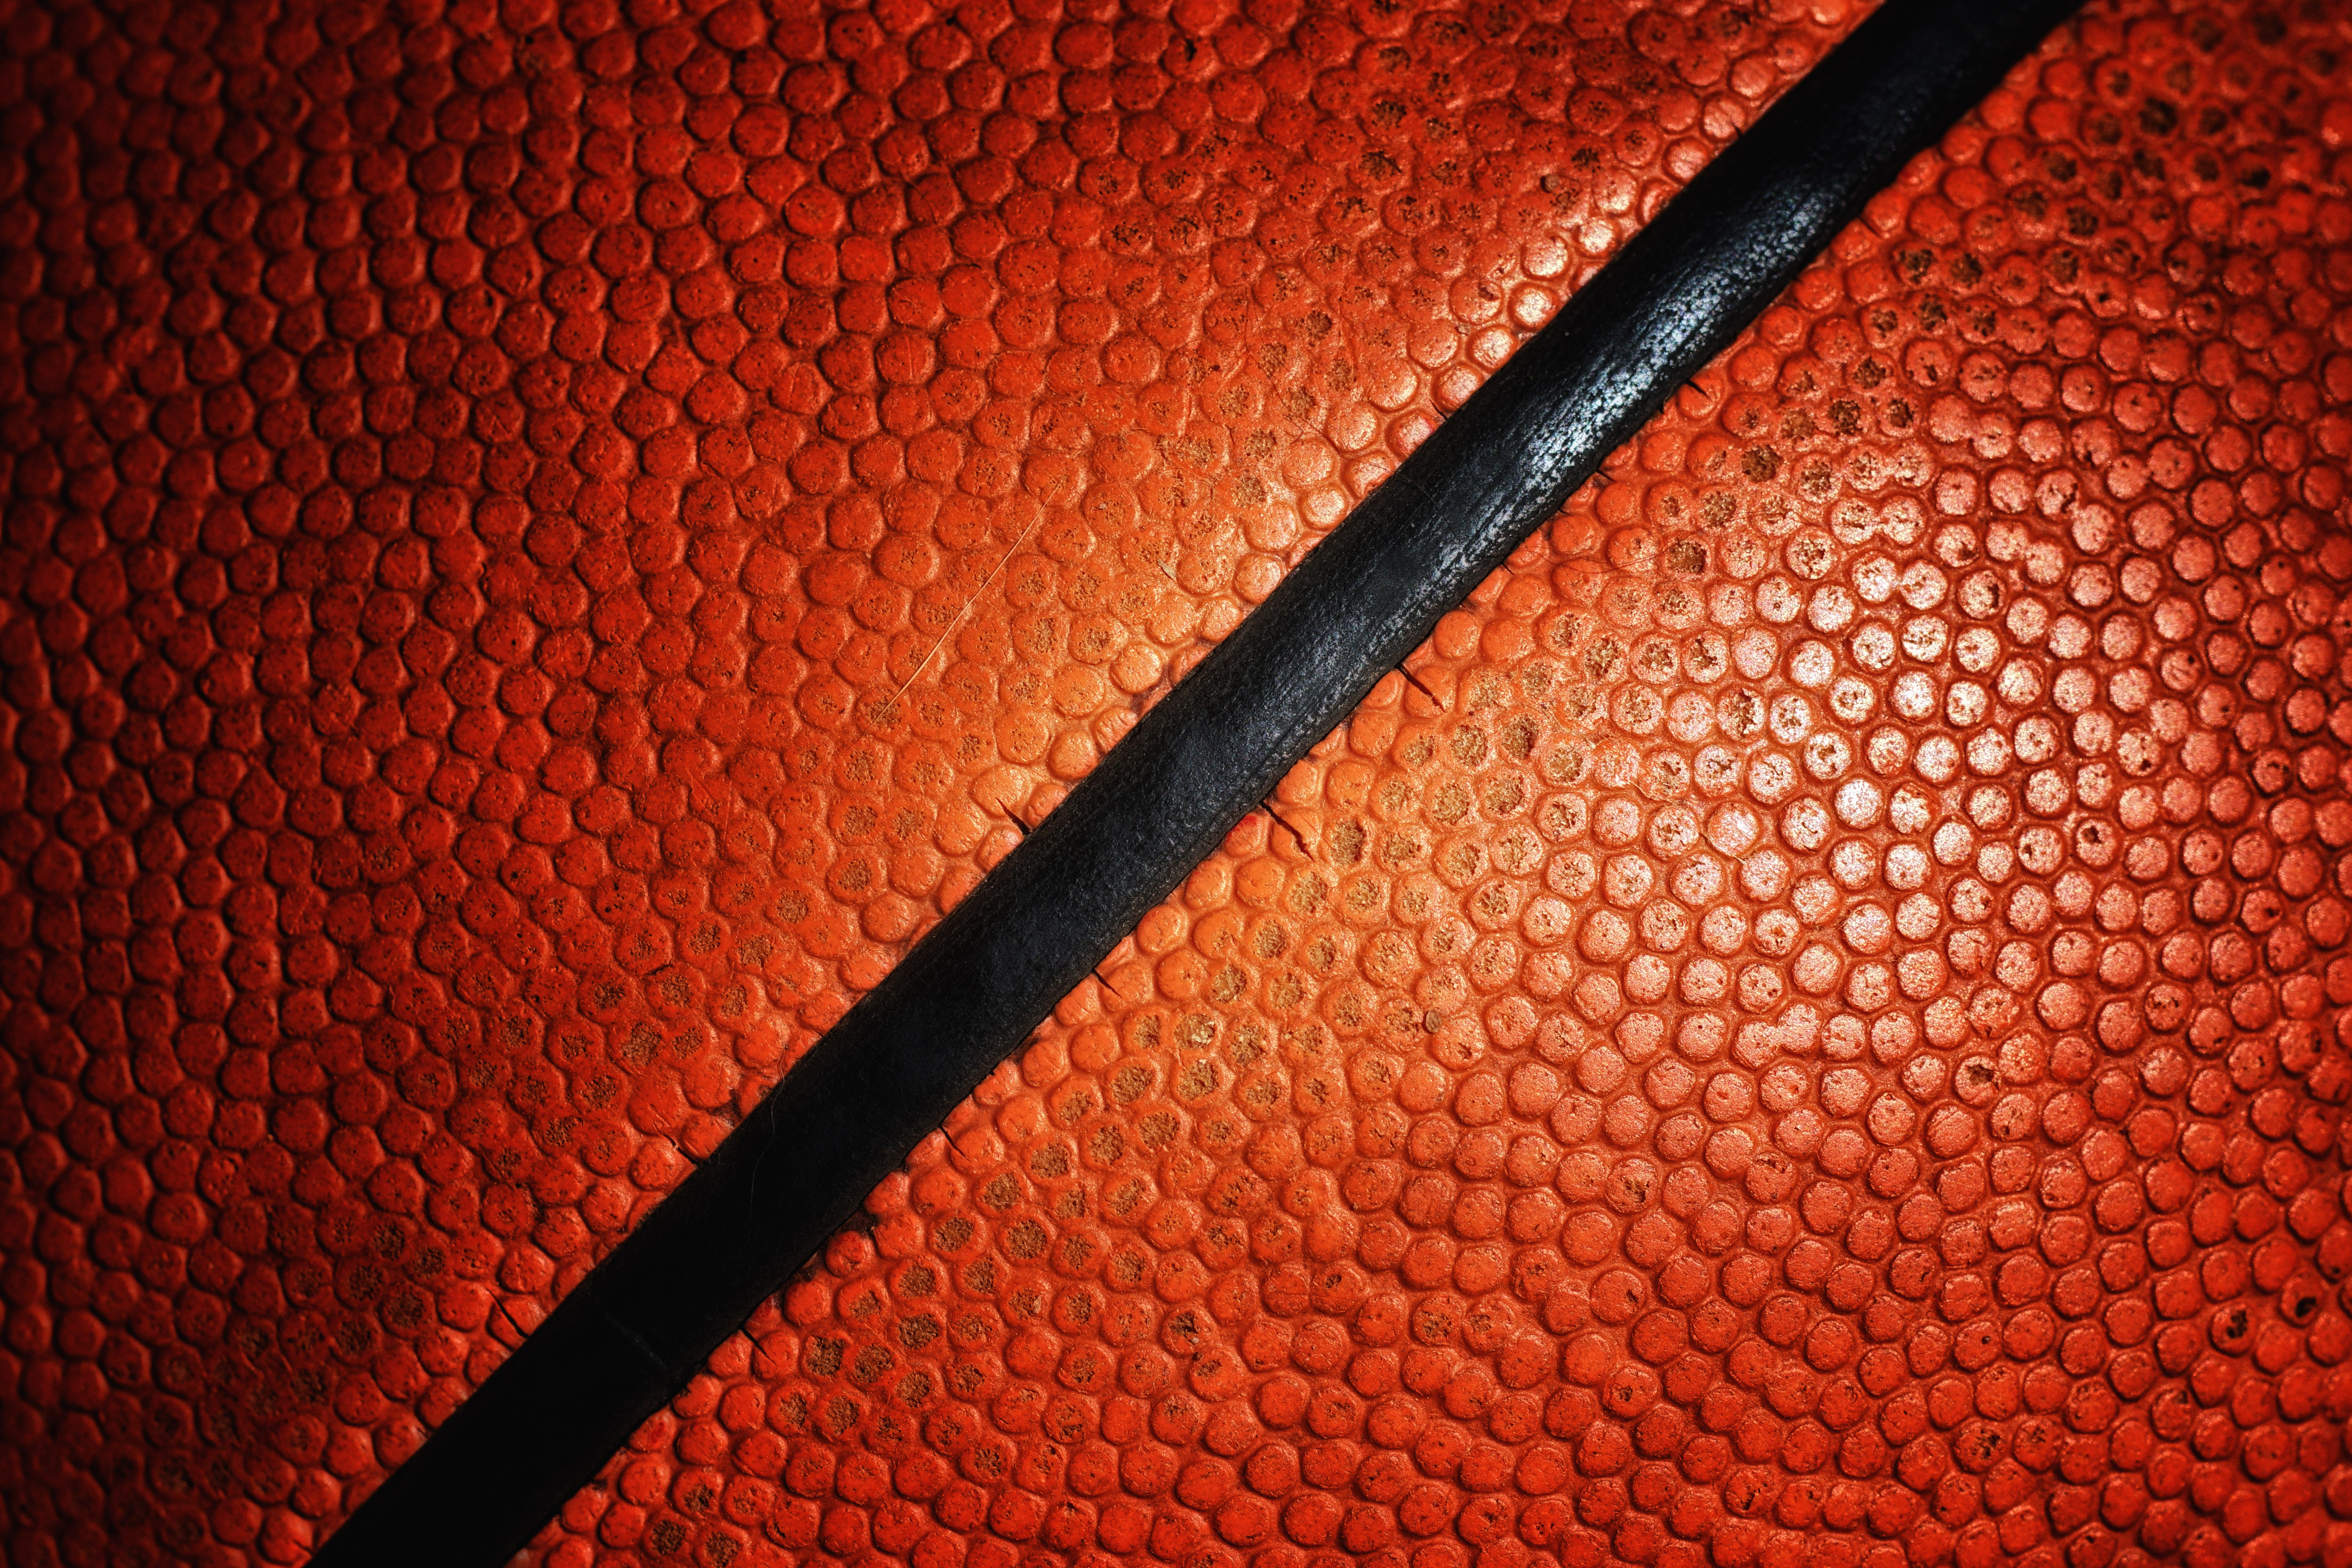 Three background images of an orange basketball texture ...